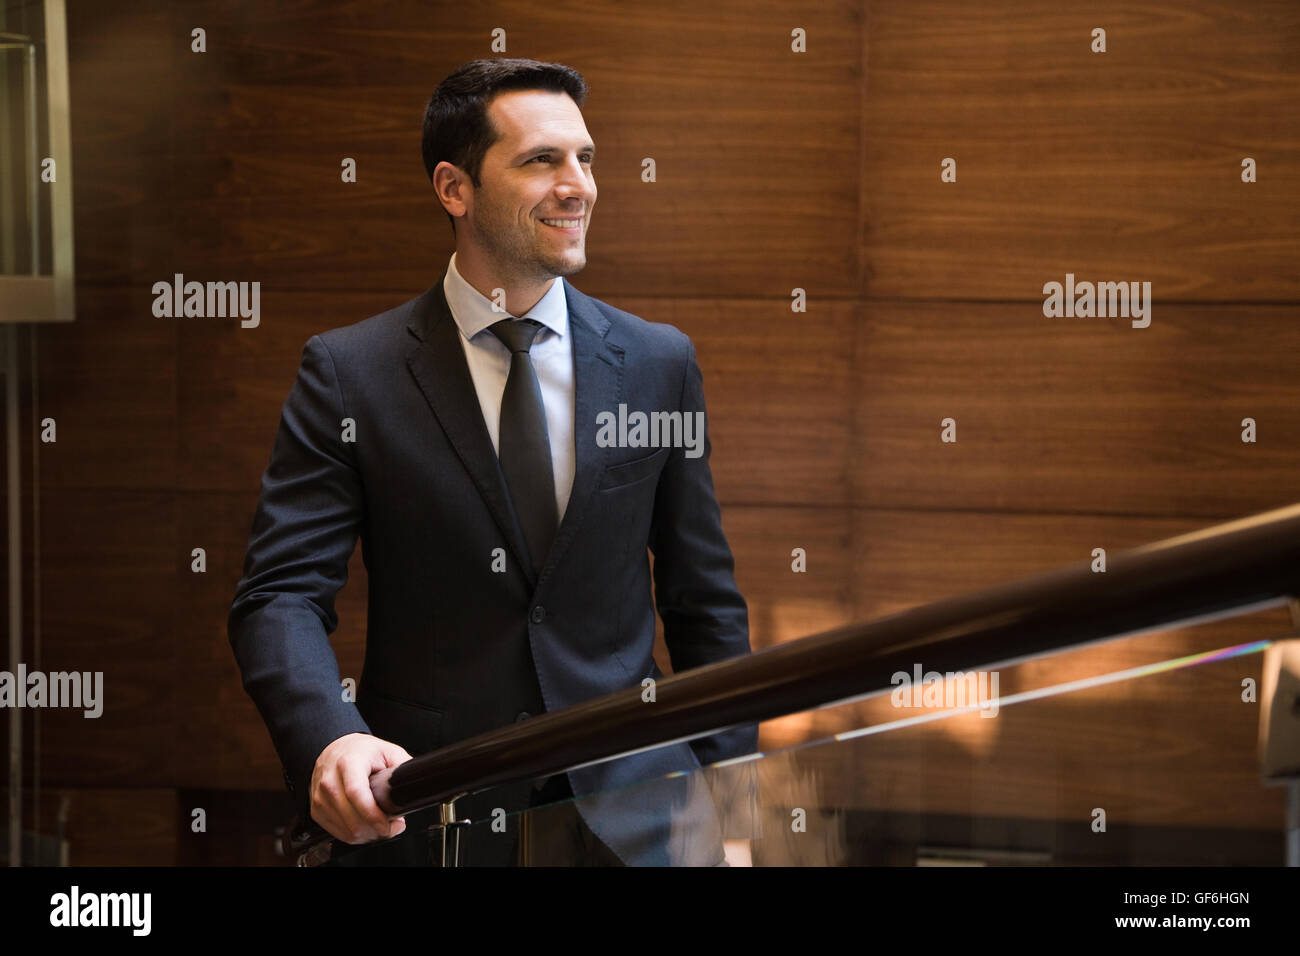 Businessman standing in hotel and looking away. Stock Photo